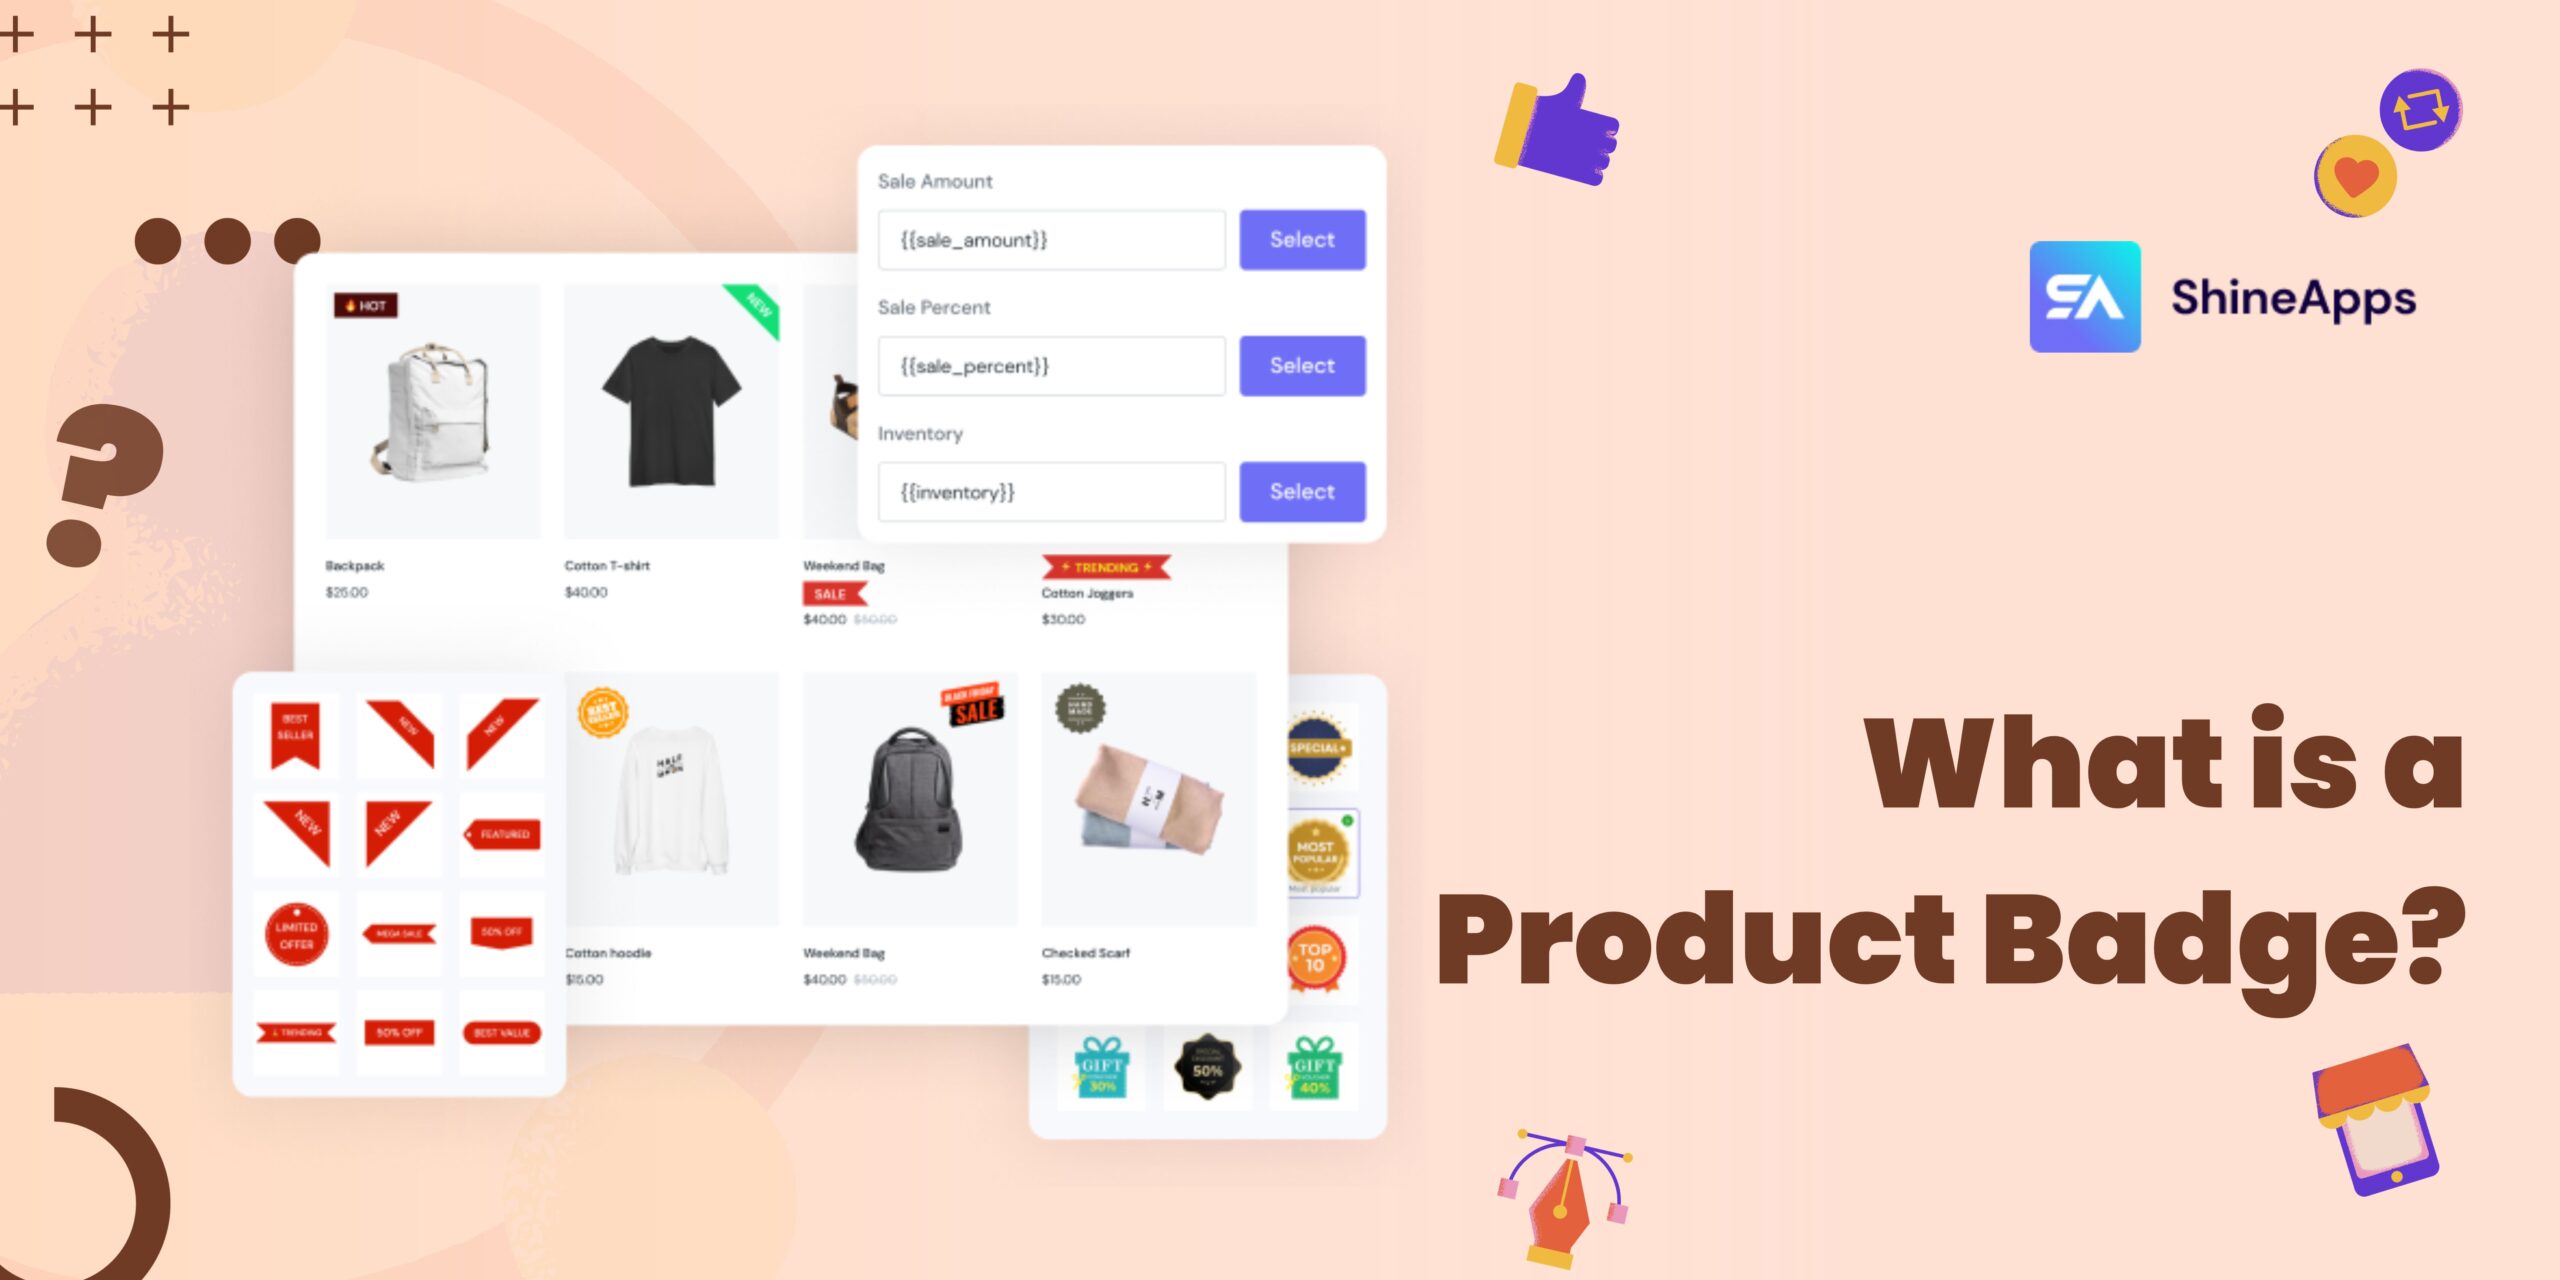 What is a Product Badge?